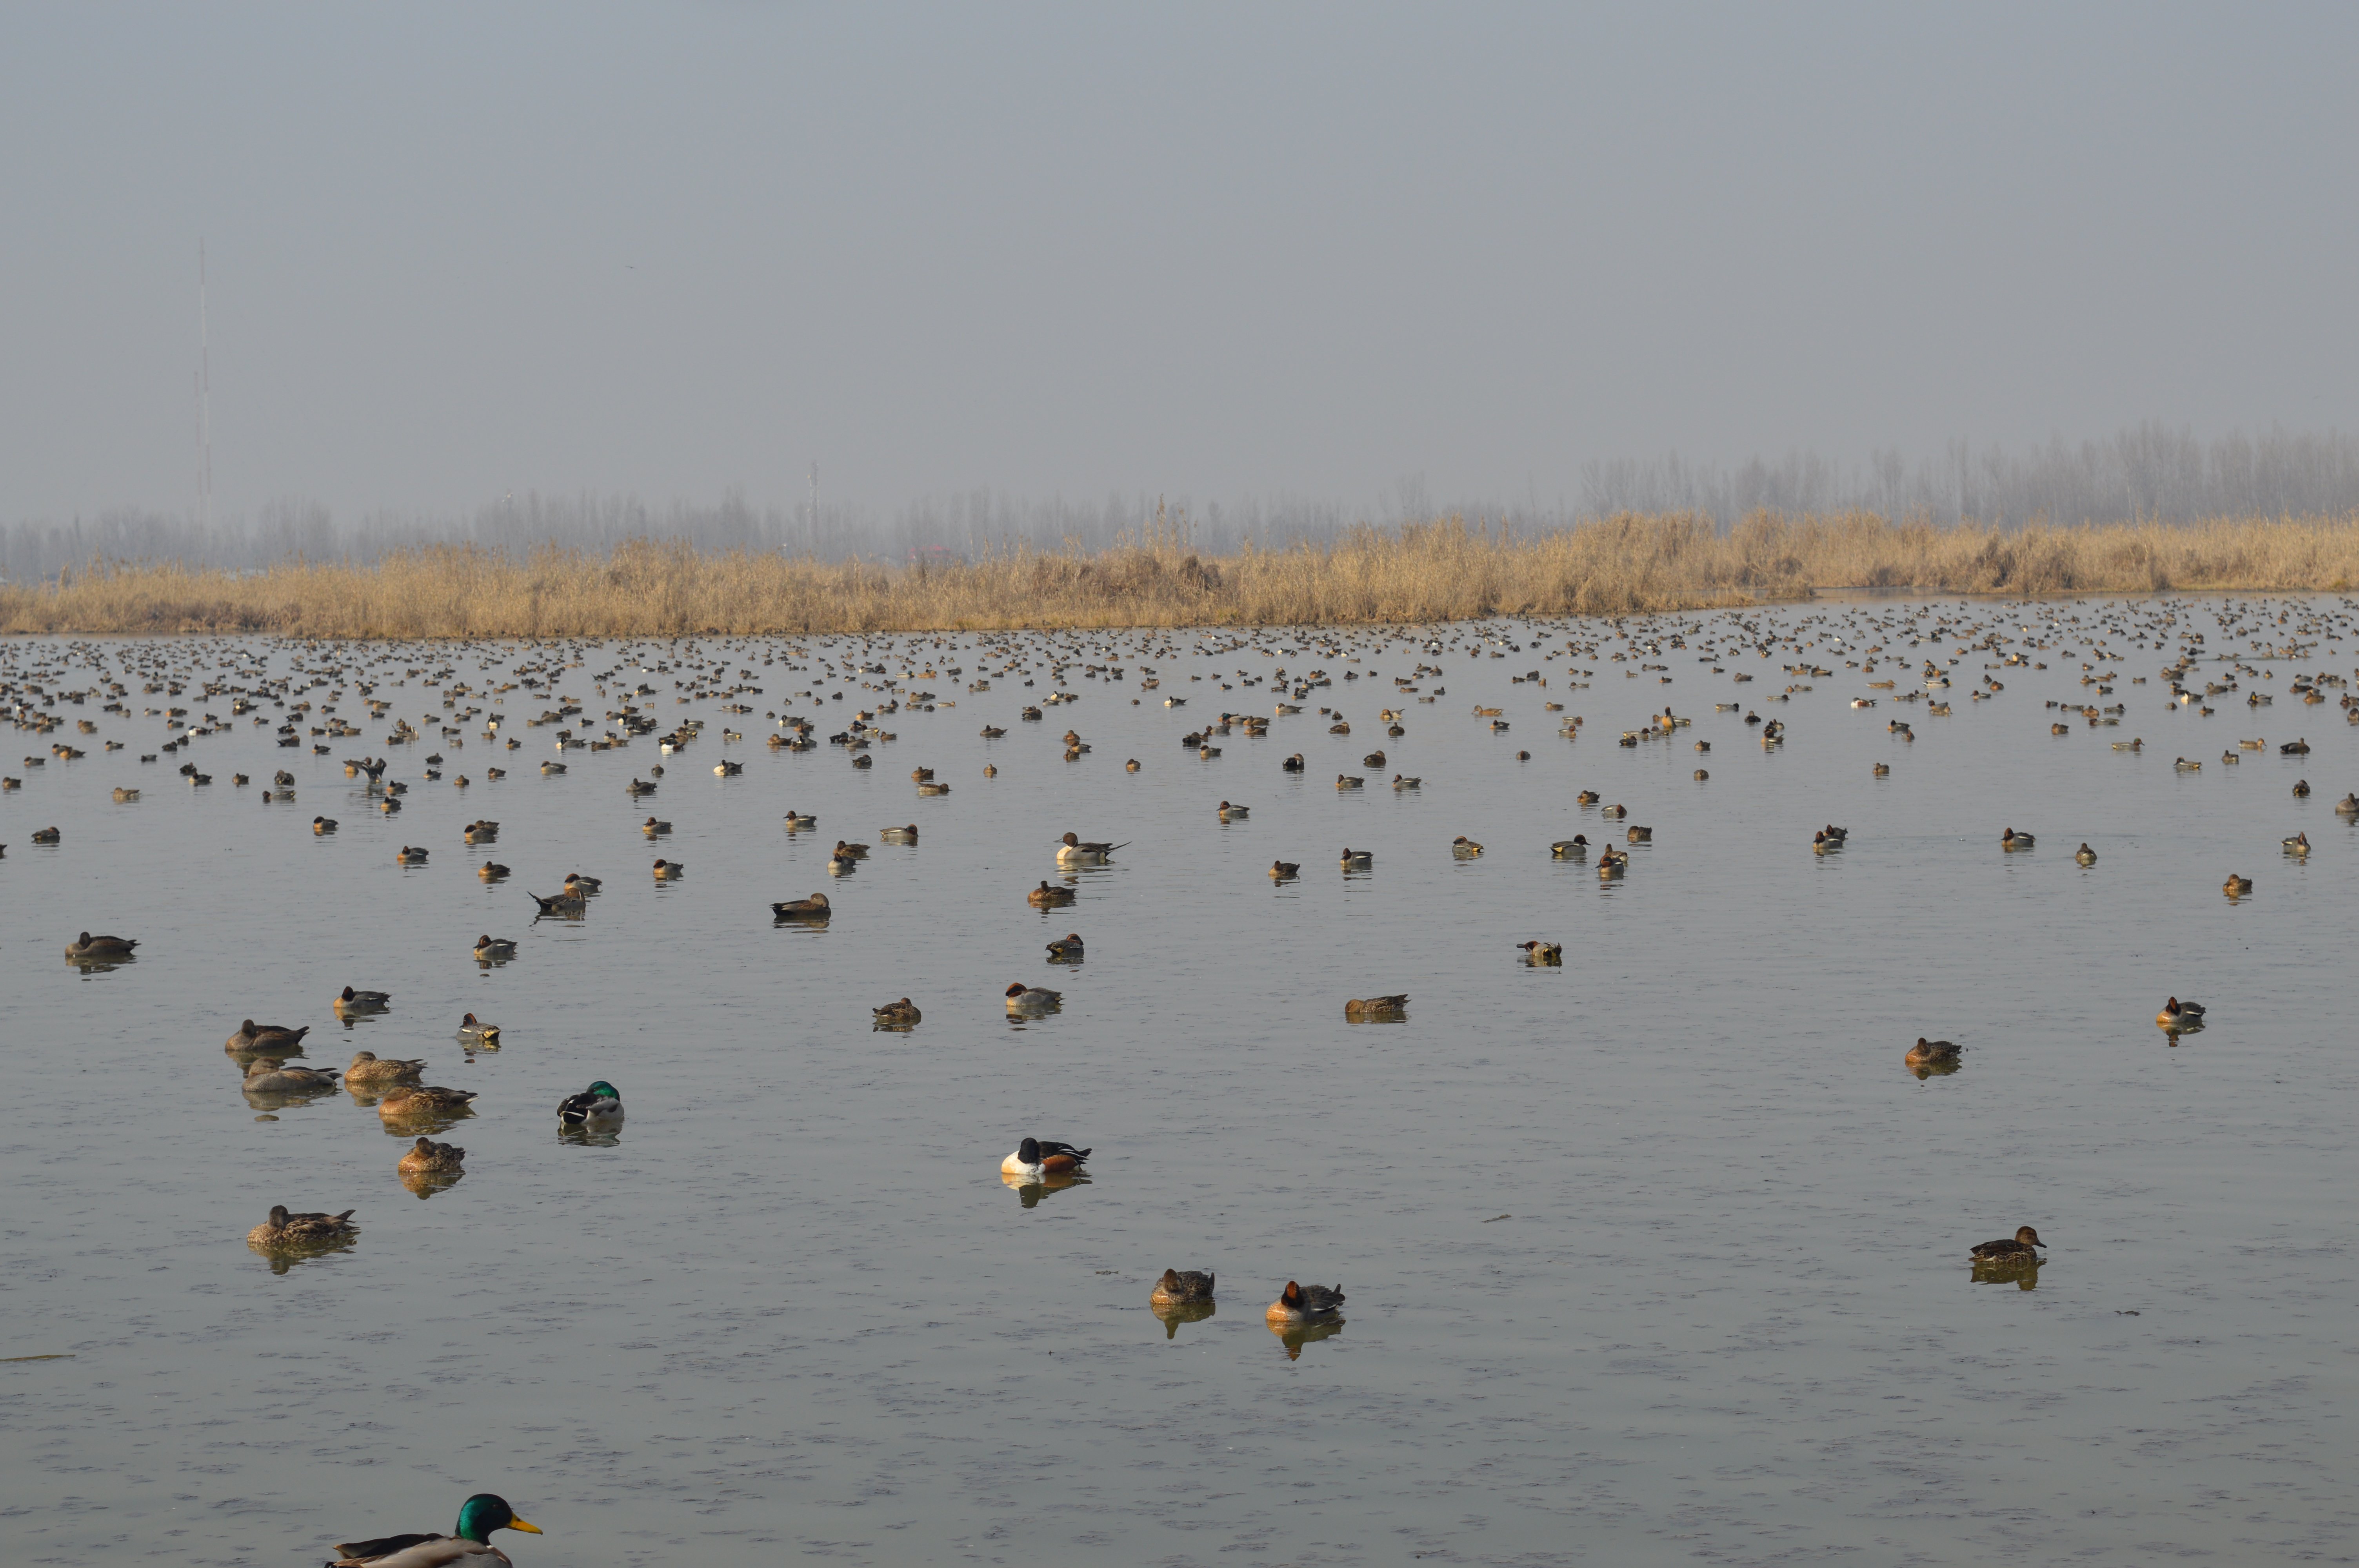 Kashmir's Hokersar Wetland, which receives around half a million migratory birds annually, has witnessed encroachment and mismanagement during the years of turmoil (credit Athar Parvaiz)